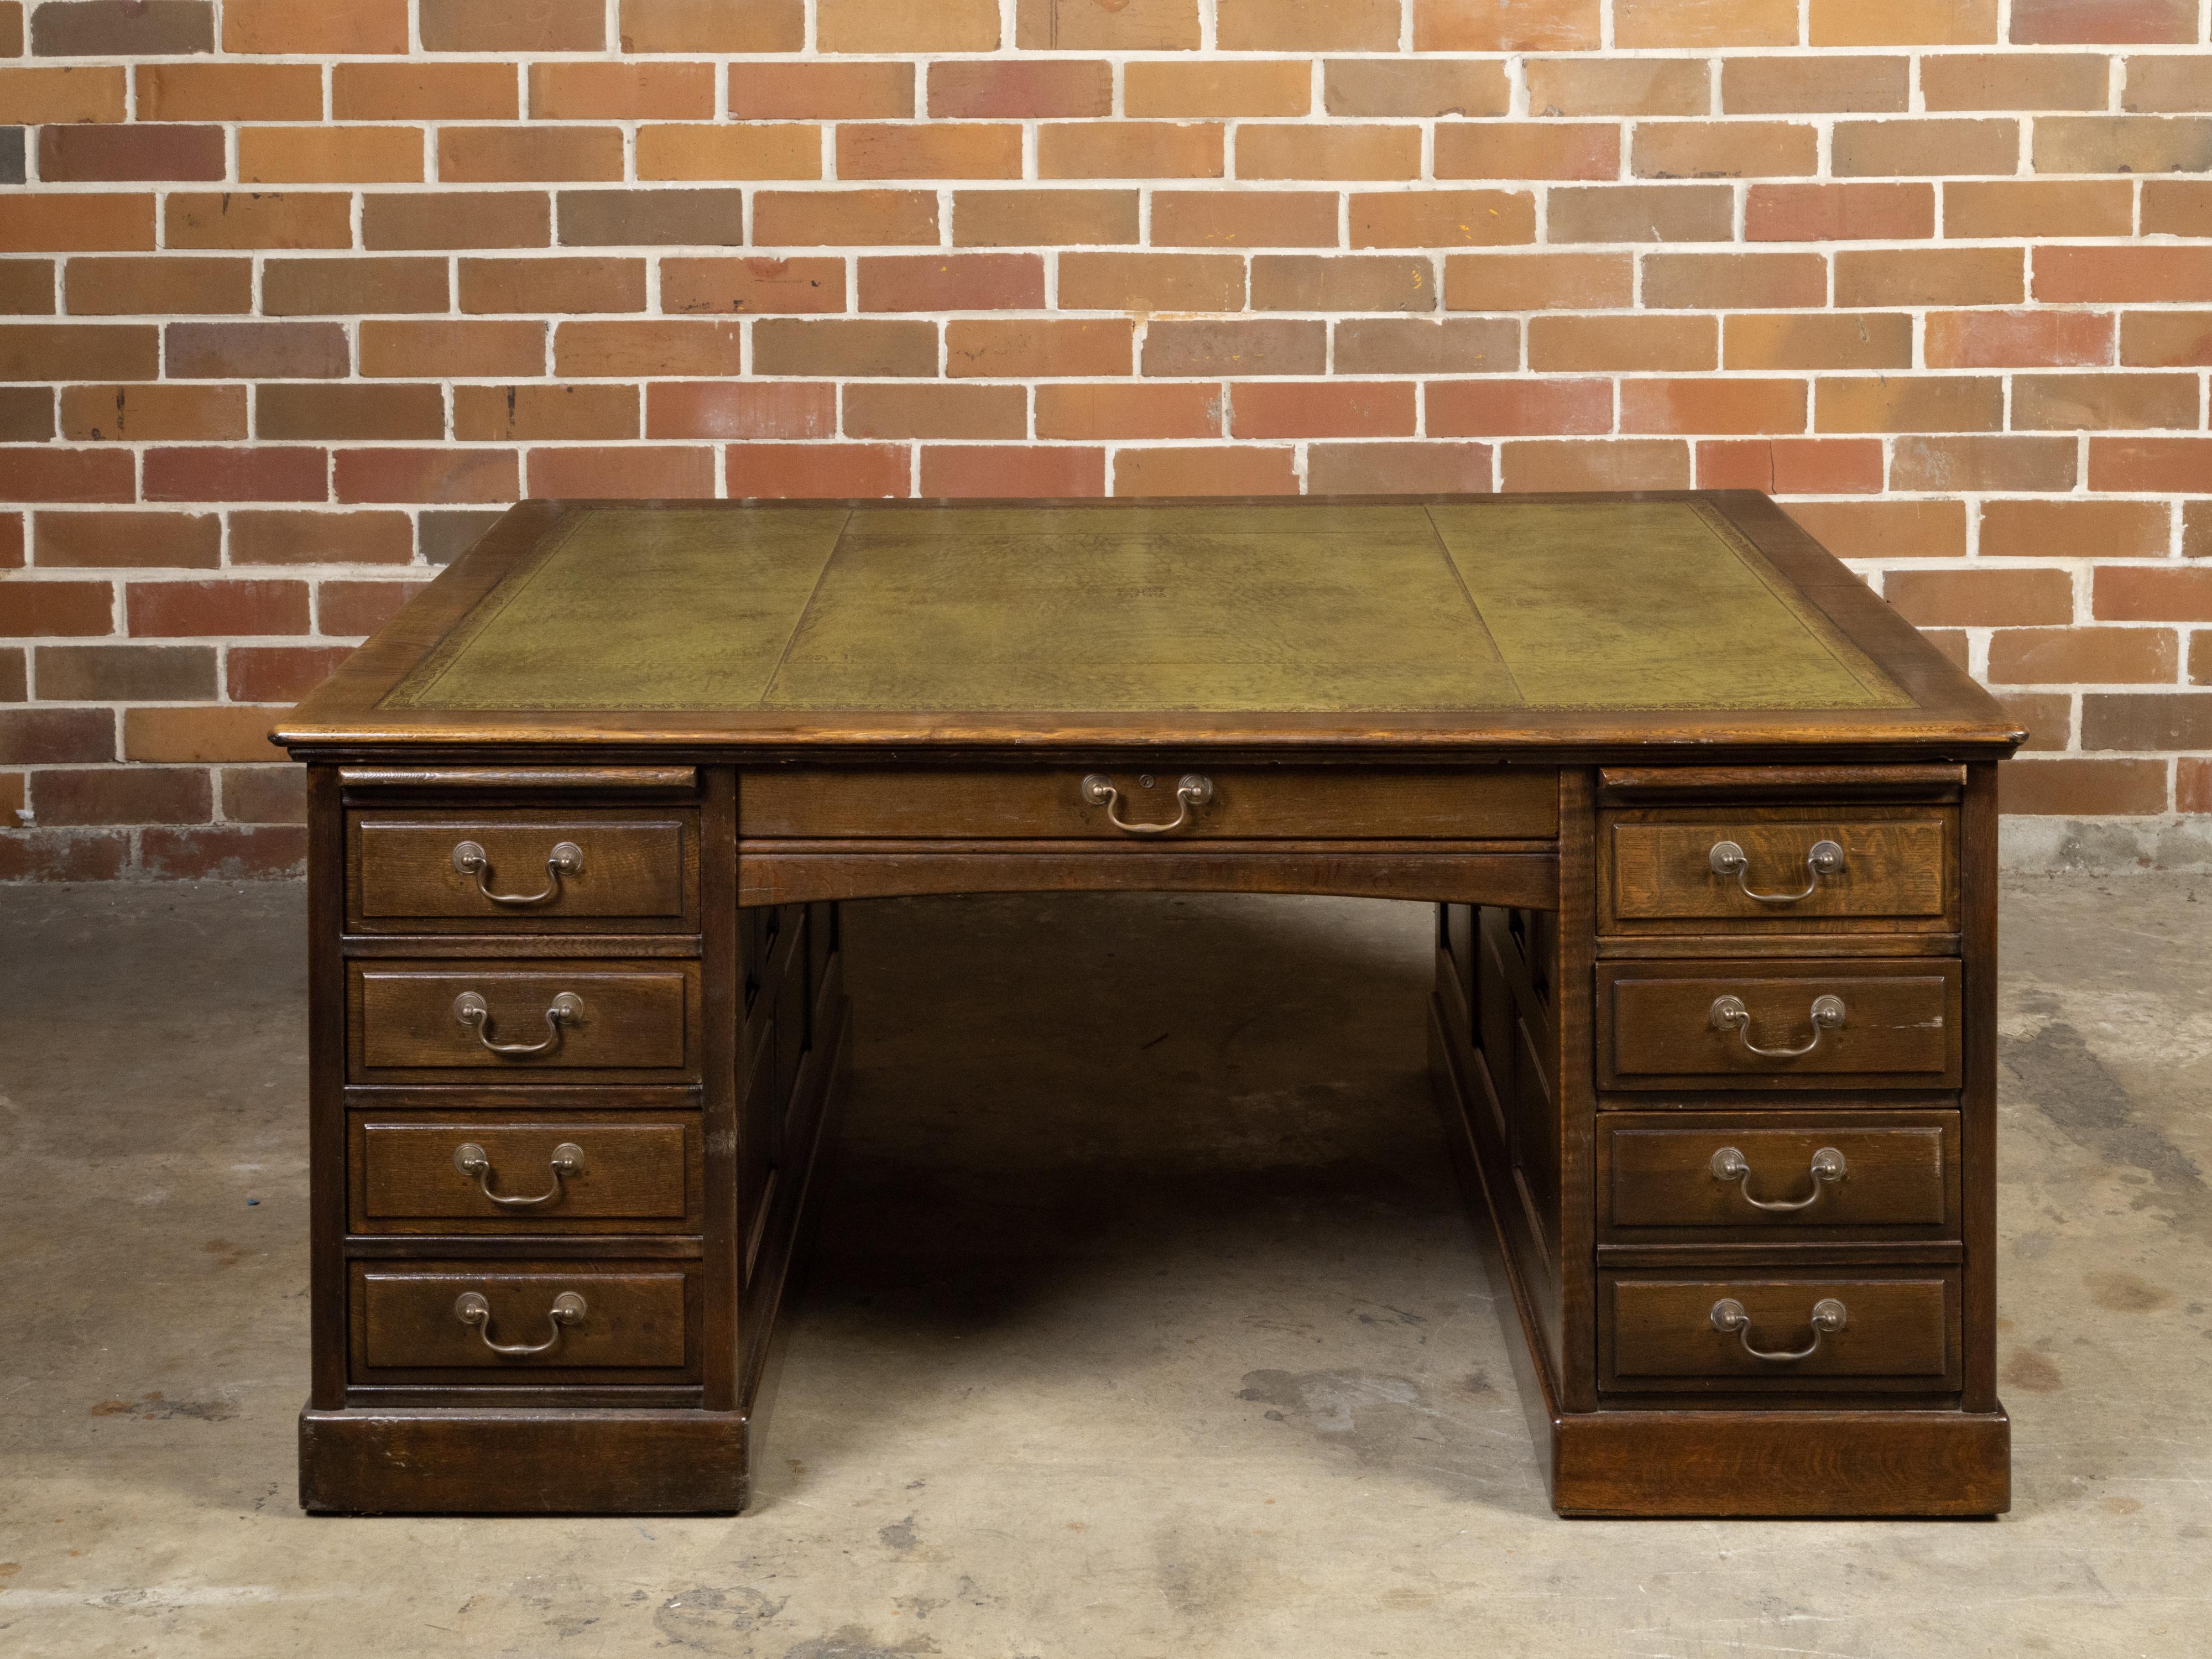 An English oversized wooden partner's desk from the late 19th century, with green leather top, gilt scrolling accents, multiple drawers and pull-outs. Created in England during the third quarter of the 19th century, this partners' desk features a